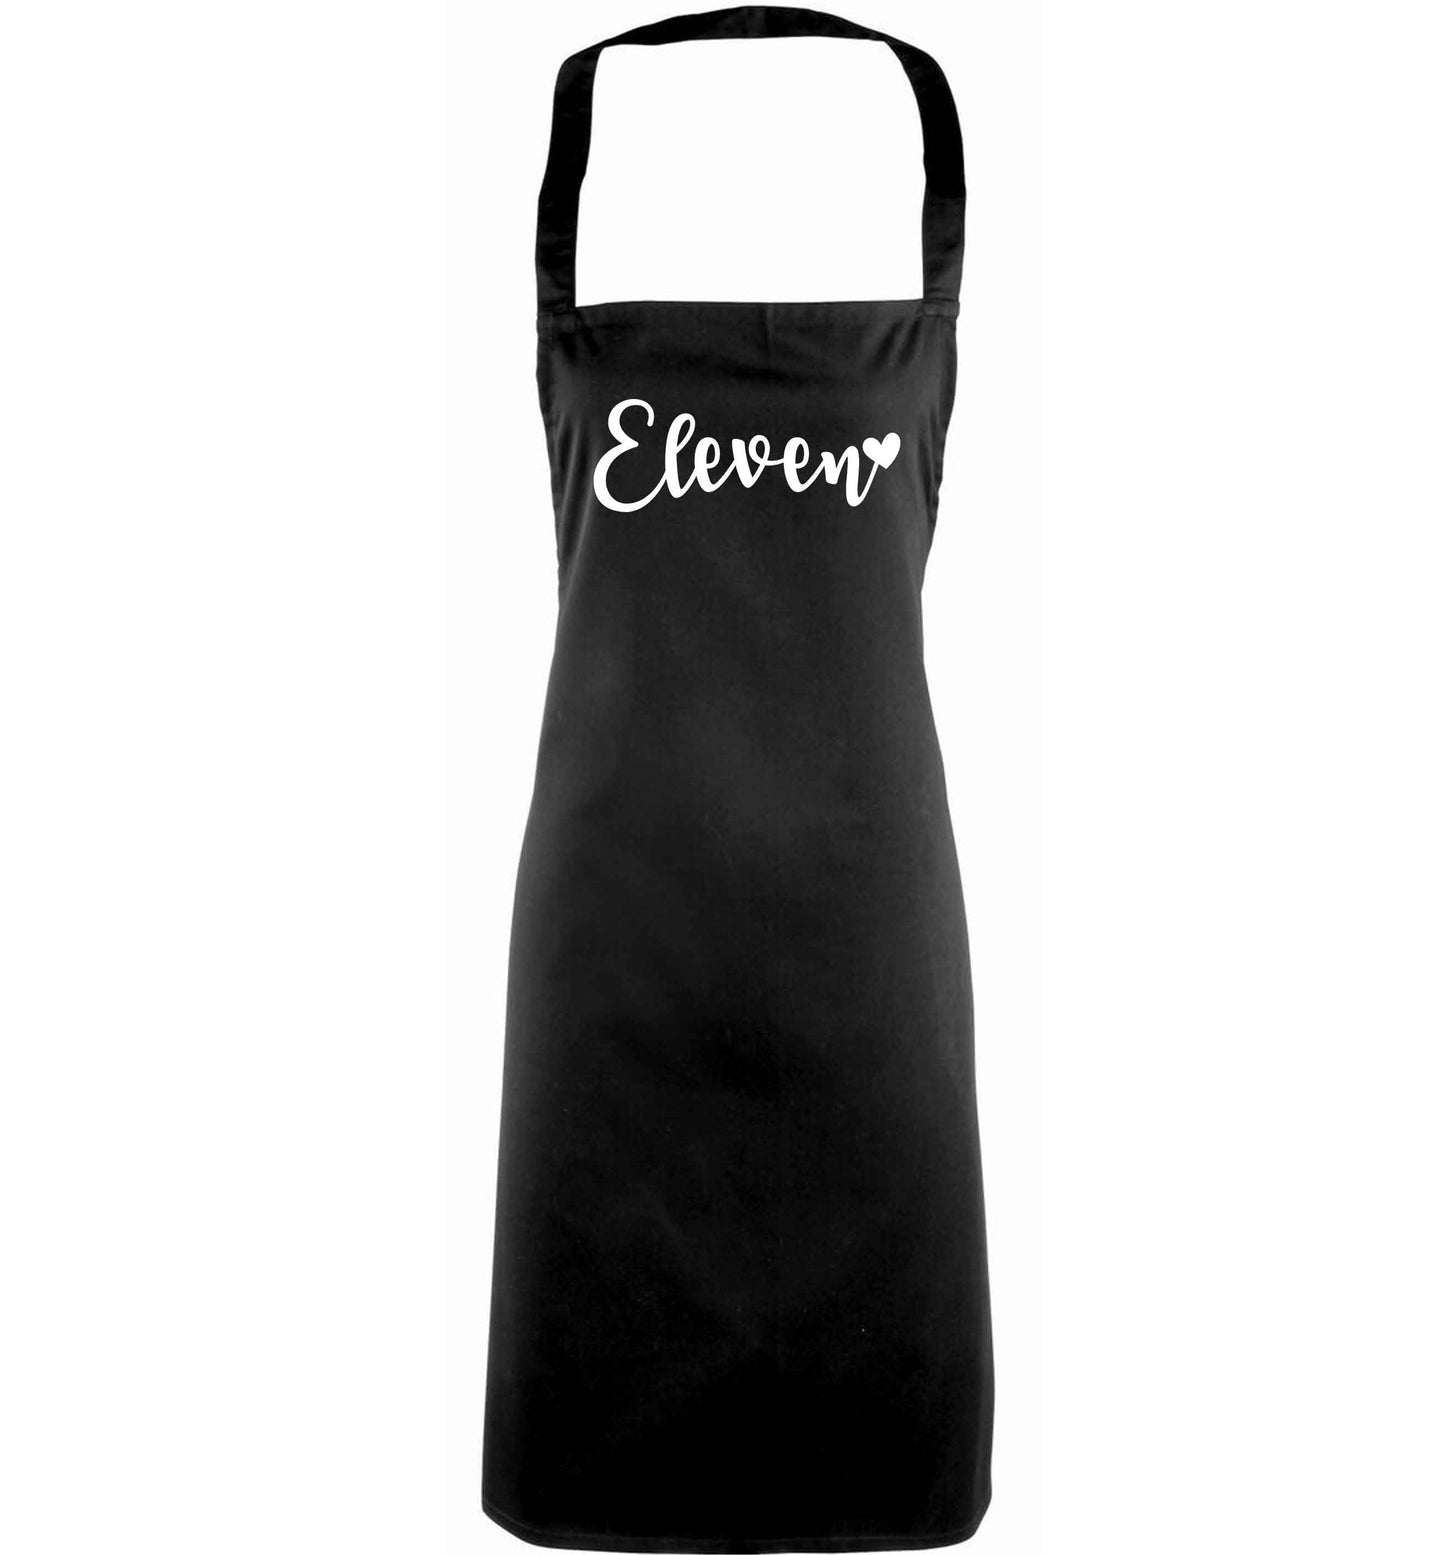 Eleven and heart! adults black apron